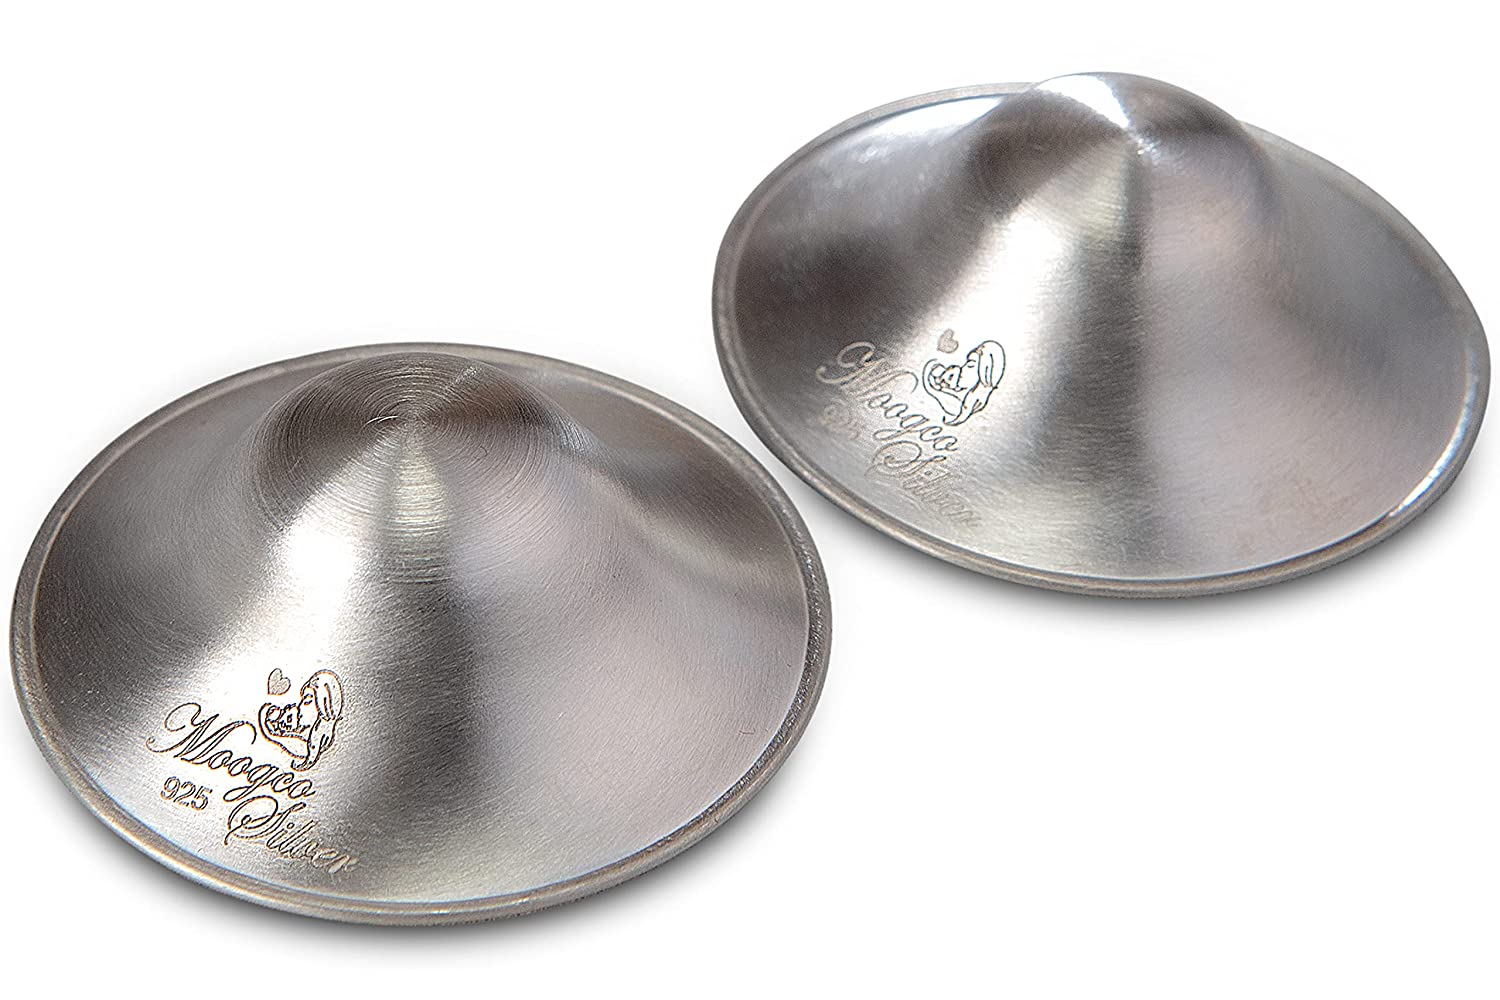 The Original Silver Nursing Cups with Silicone Pads - Experience